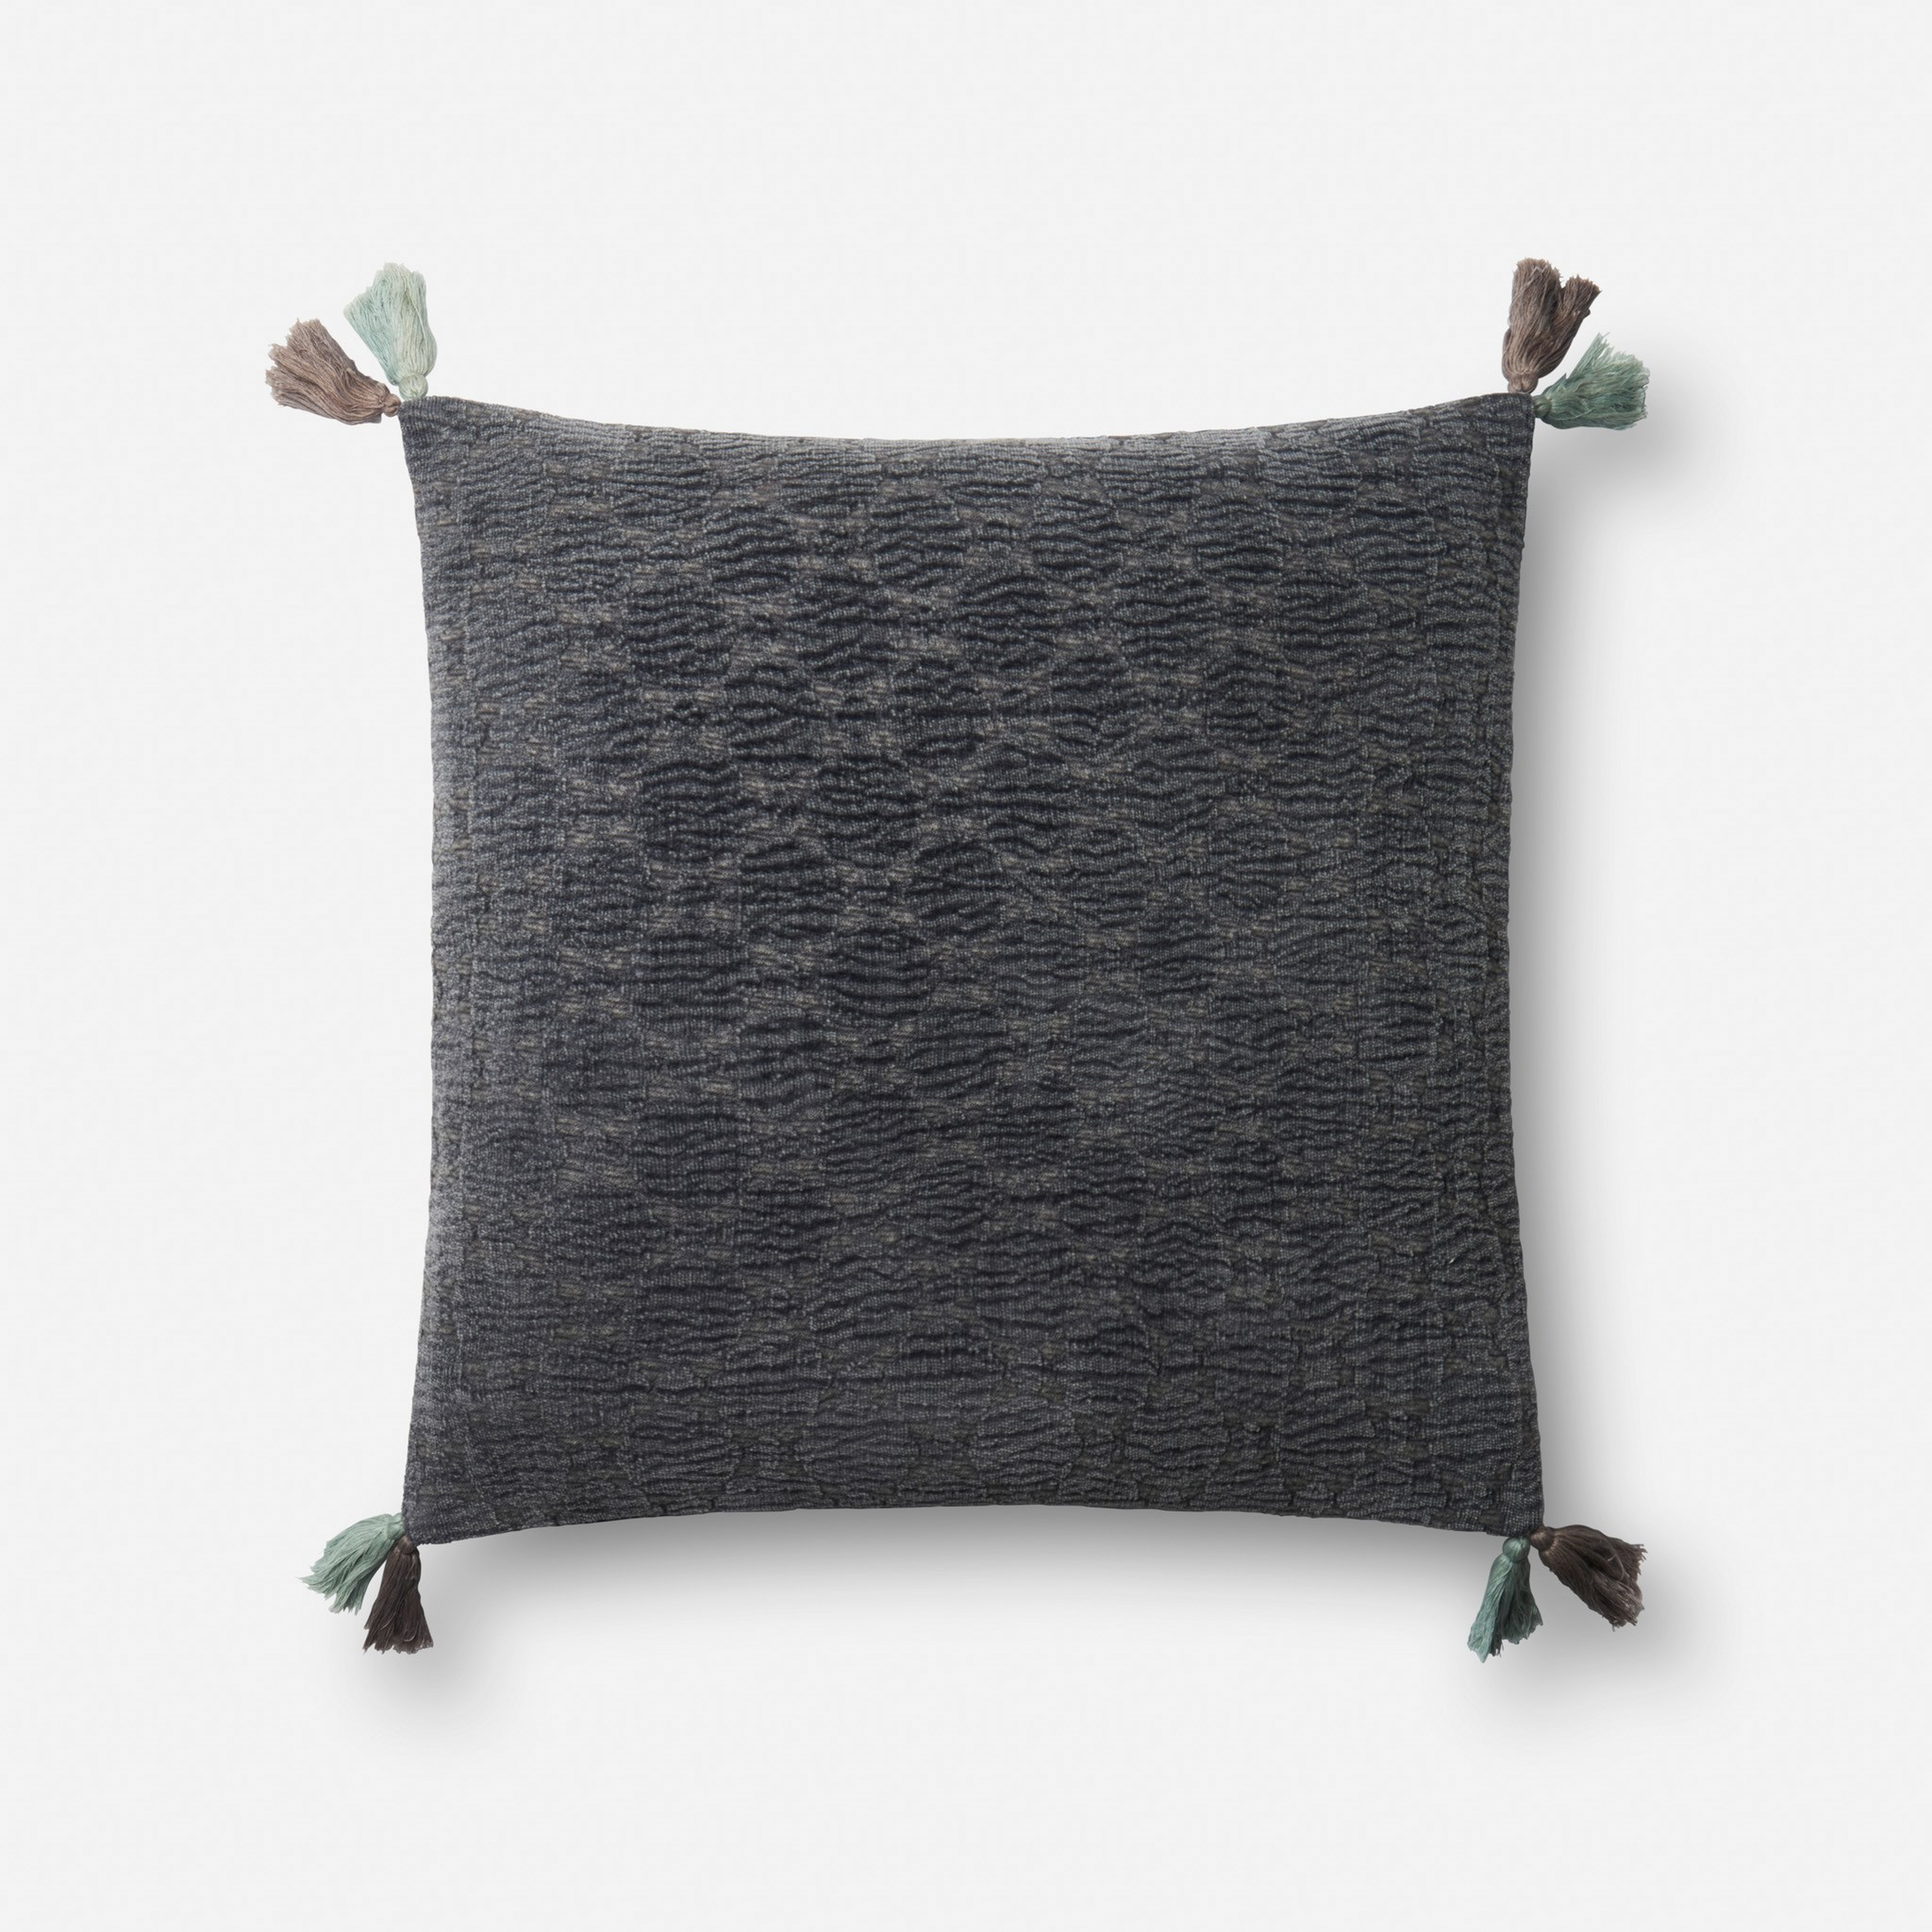 PILLOWS - CHARCOAL - 18" X 18" Cover w/Down - Loloi Rugs